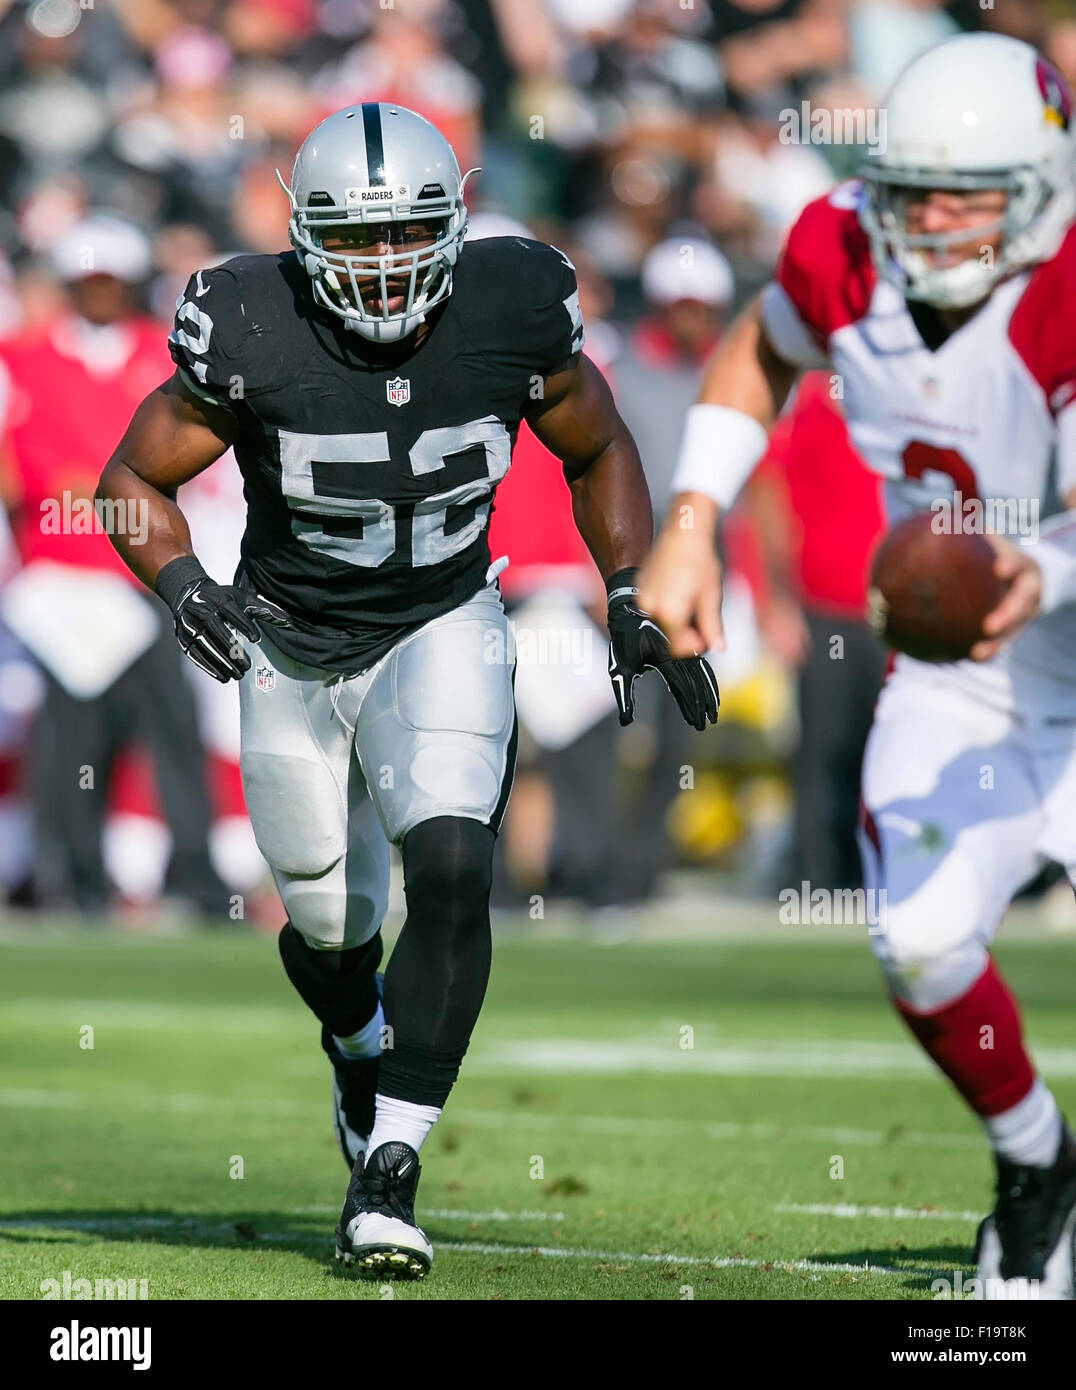 Oakland, CA. 30th Aug, 2015. Oakland Raiders outside linebacker Khalil Mack (52) in action during the NFL football game between the Oakland Raiders and the Arizona Cardinals at the O.co Coliseum in Oakland, CA. The Cardinals defeated the Raiders 30-23. Damon Tarver/Cal Sport Media/Alamy Live News Stock Photo